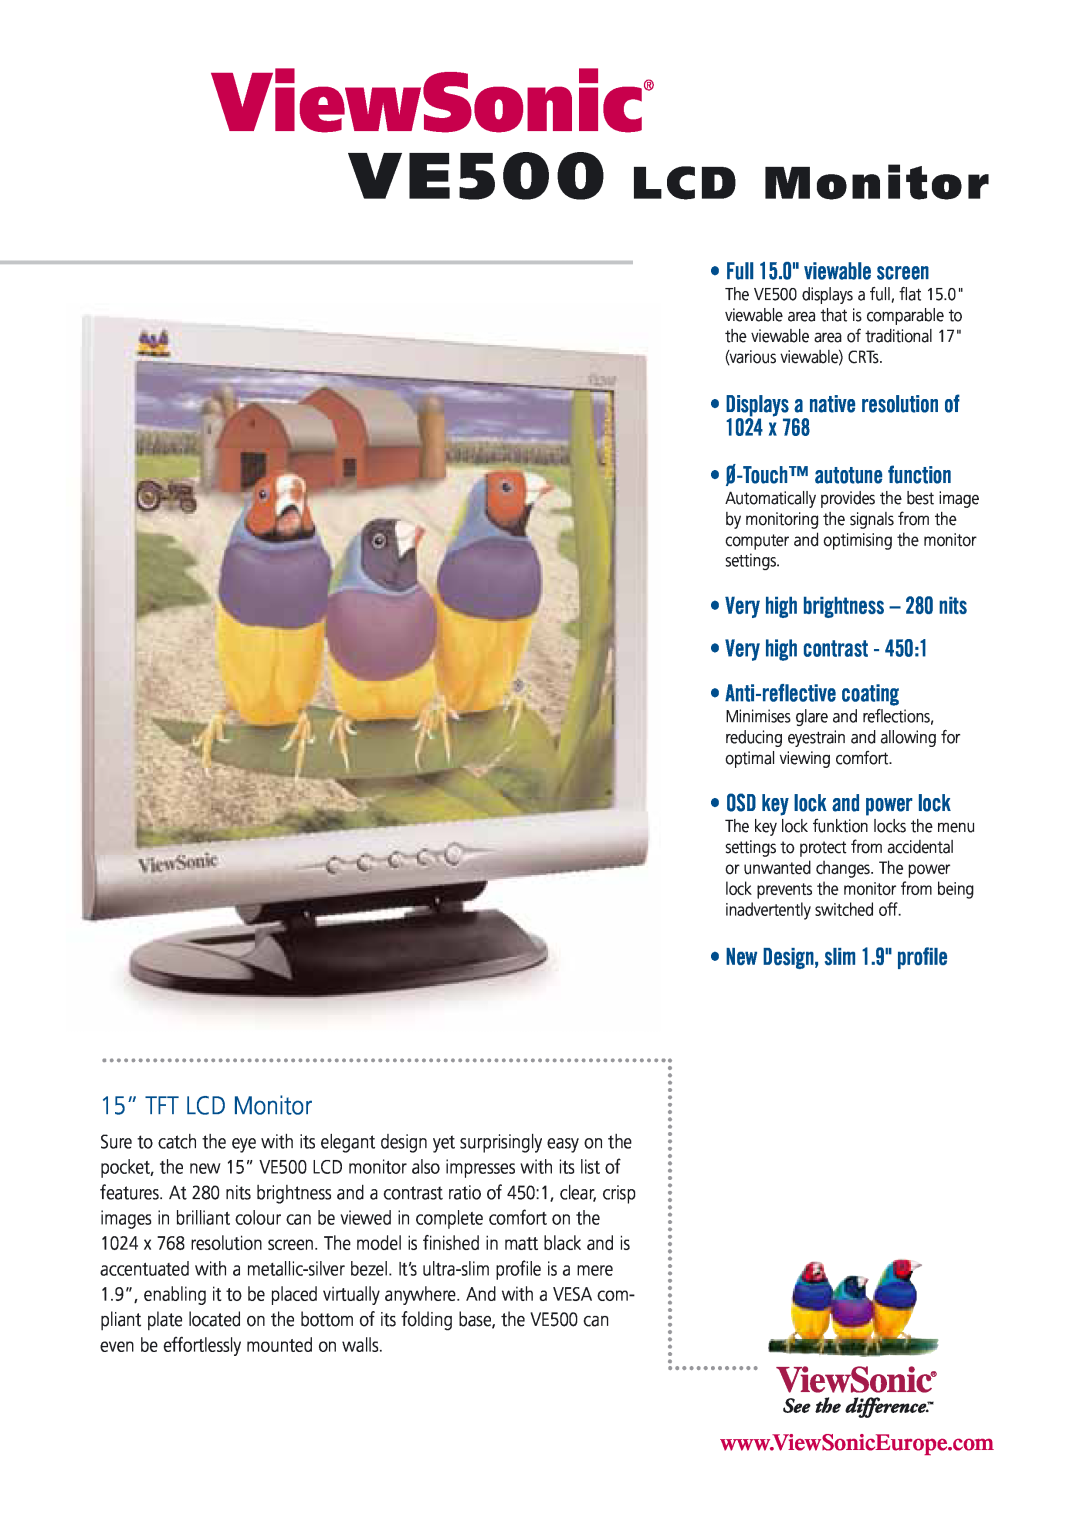 ViewSonic manual VE500 LCD Monitor, Full 15.0 viewable screen, Ø-Touchautotune function, Very high contrast - 450 